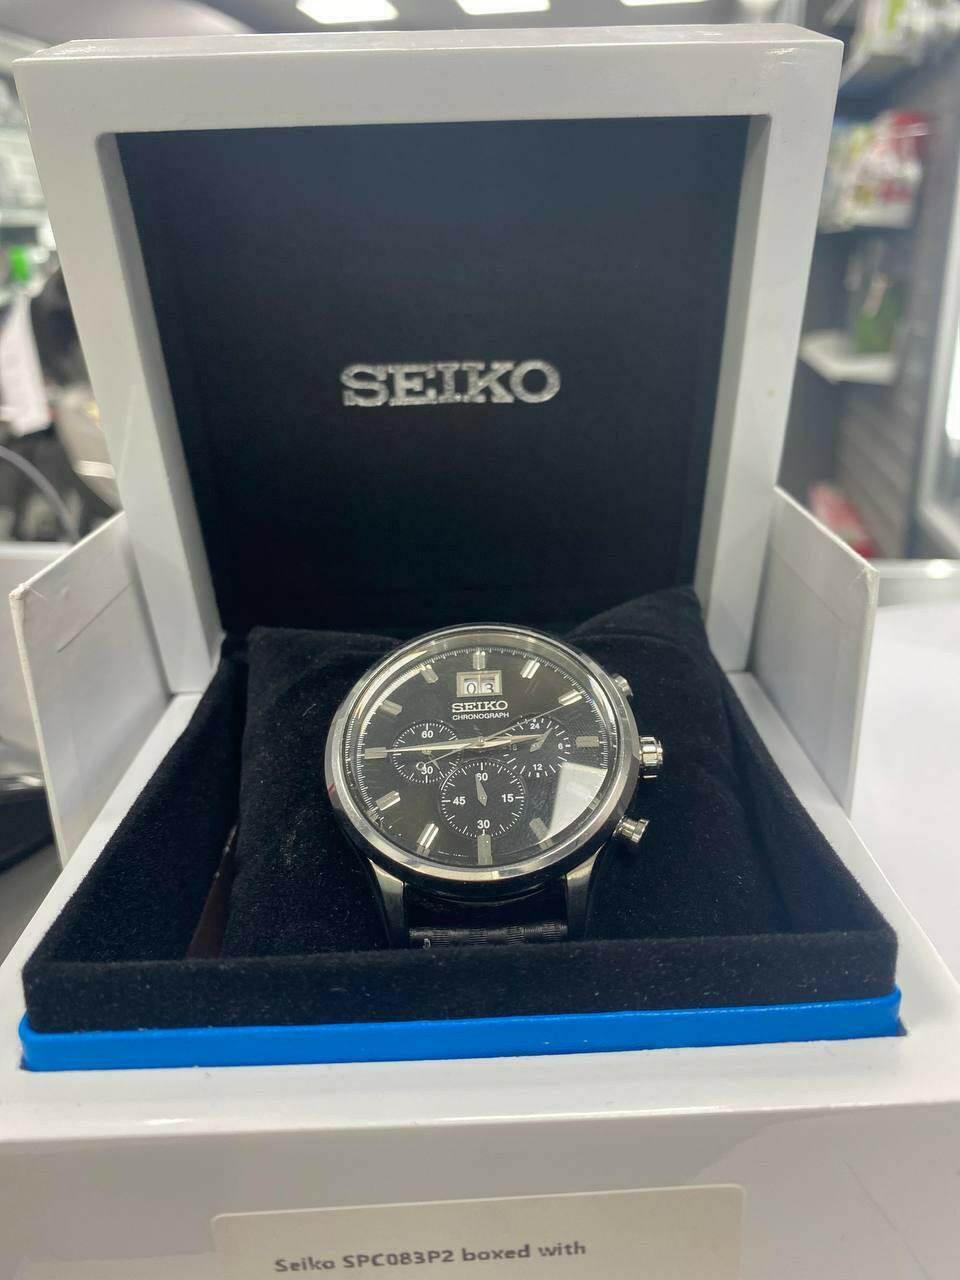 Seiko SPC083P2 boxed with papers